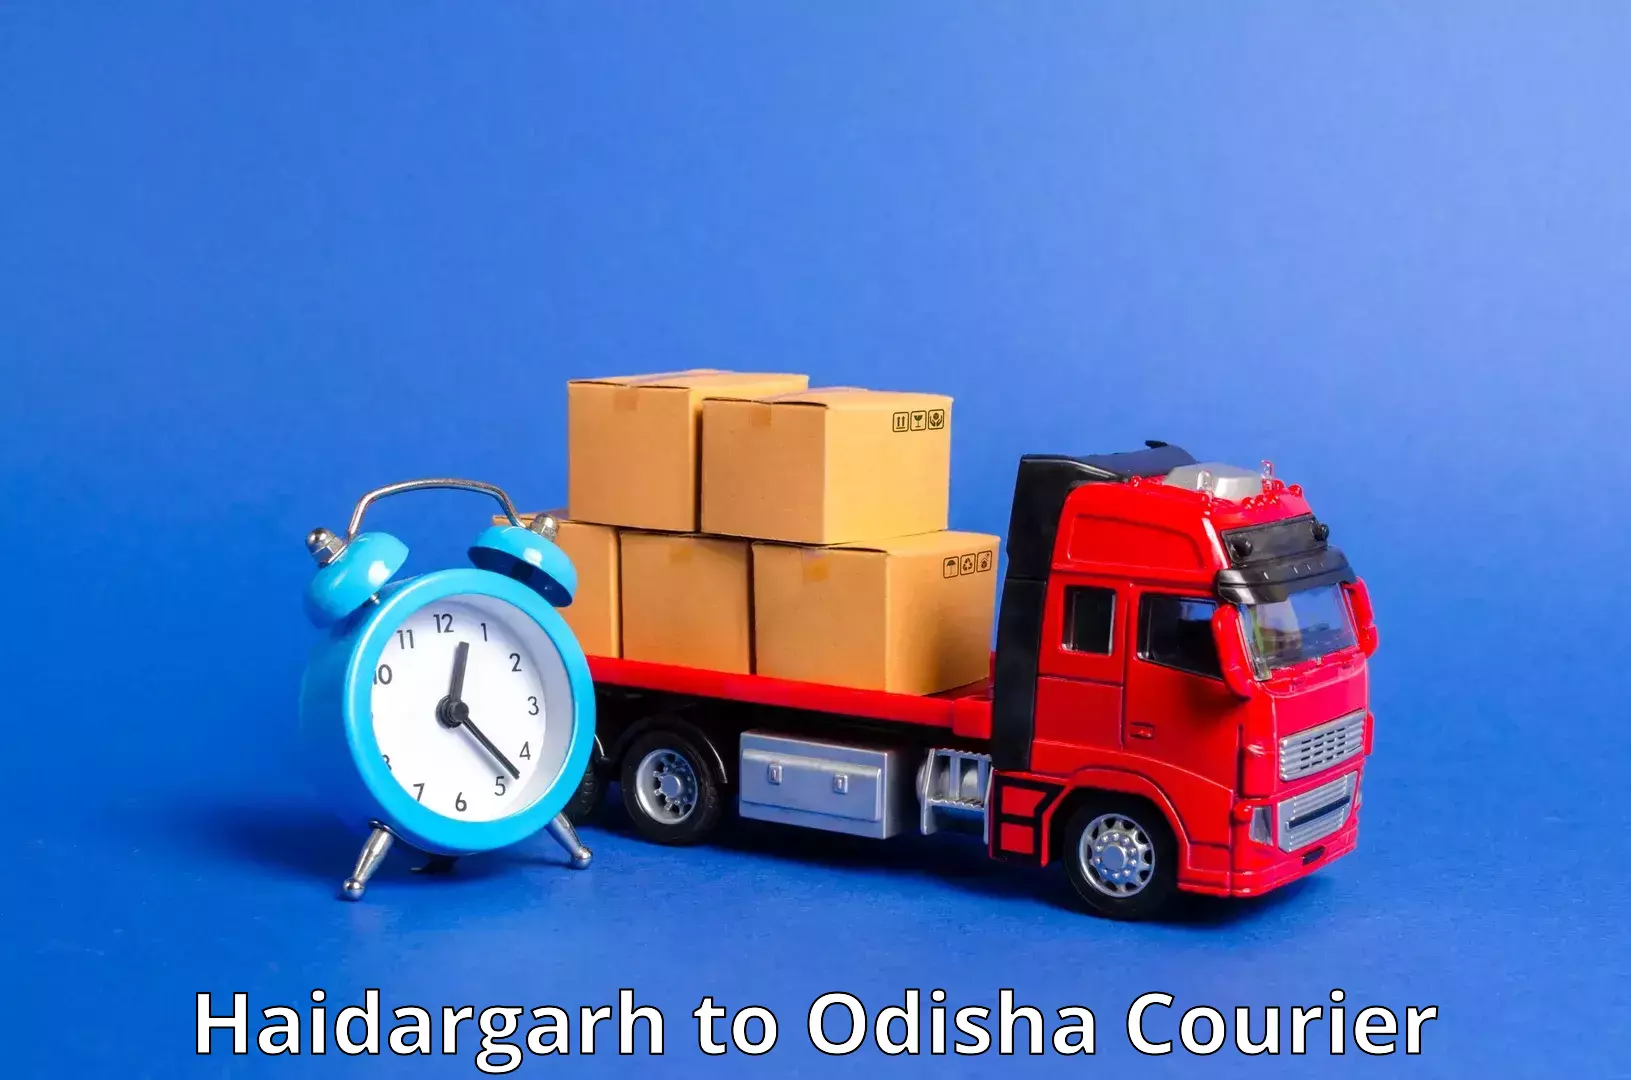 Overnight delivery services Haidargarh to Asika